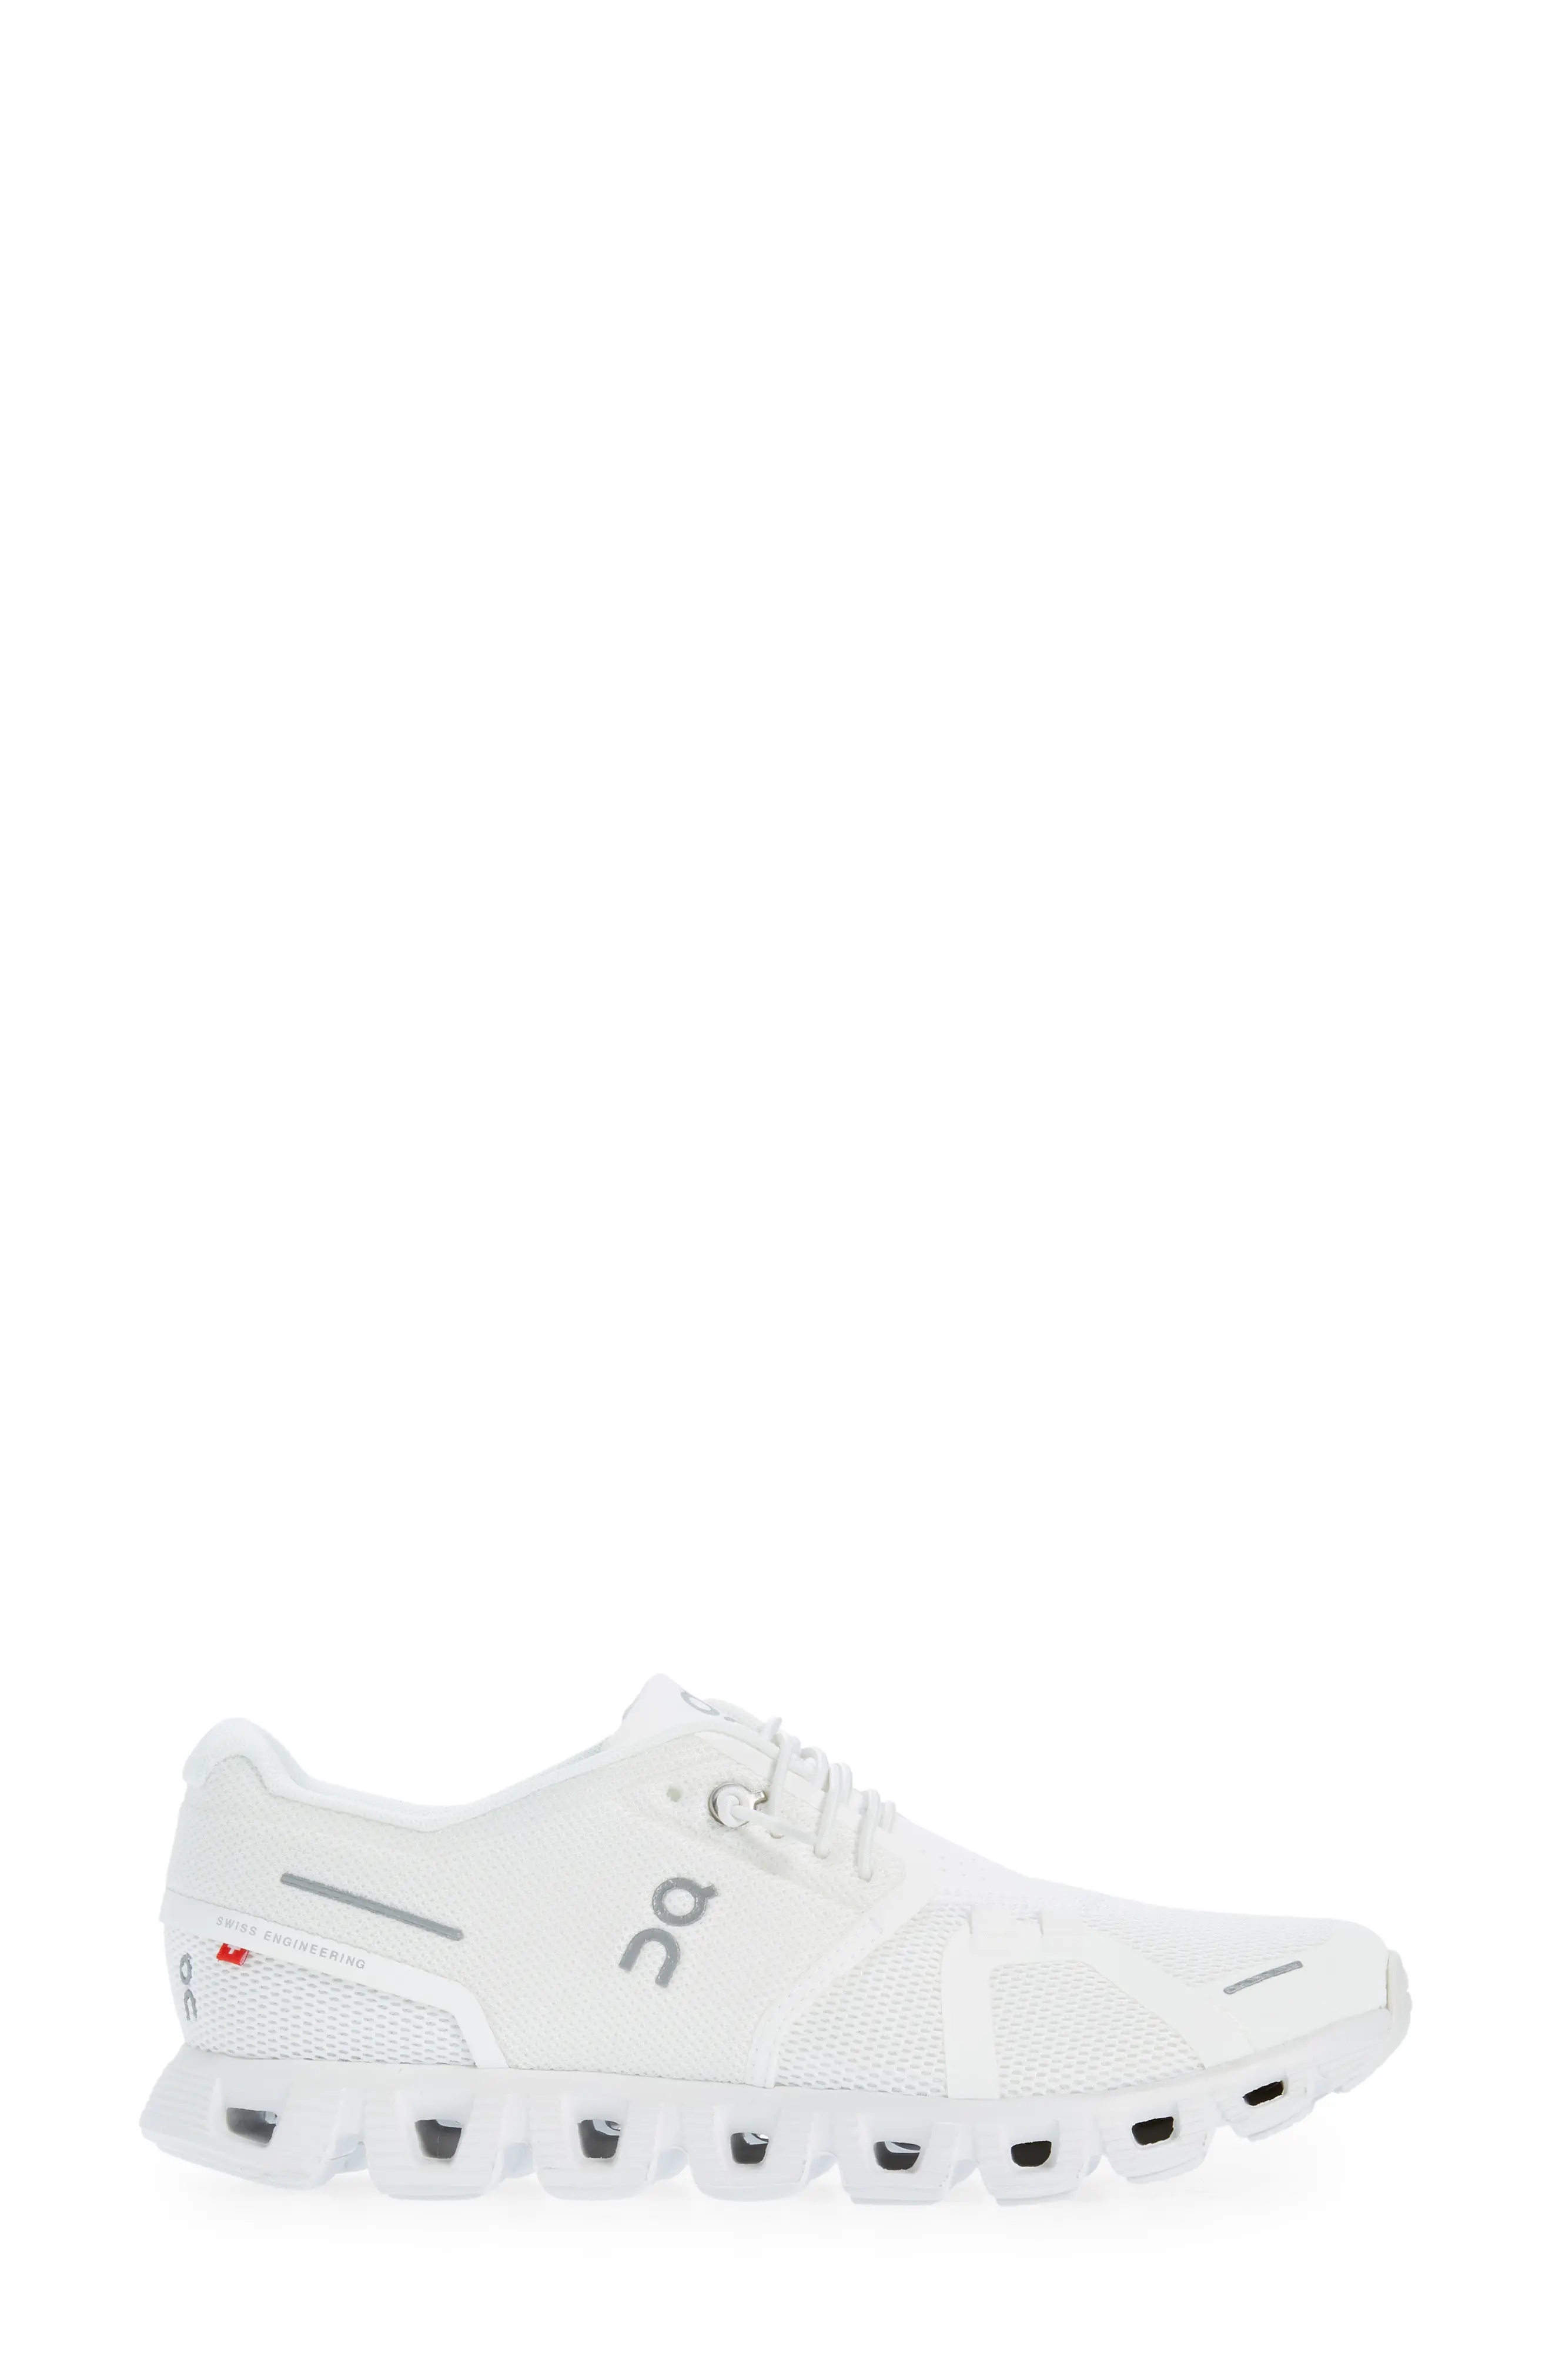 Cloud 5 Running Shoe in Undyed White/White - 3